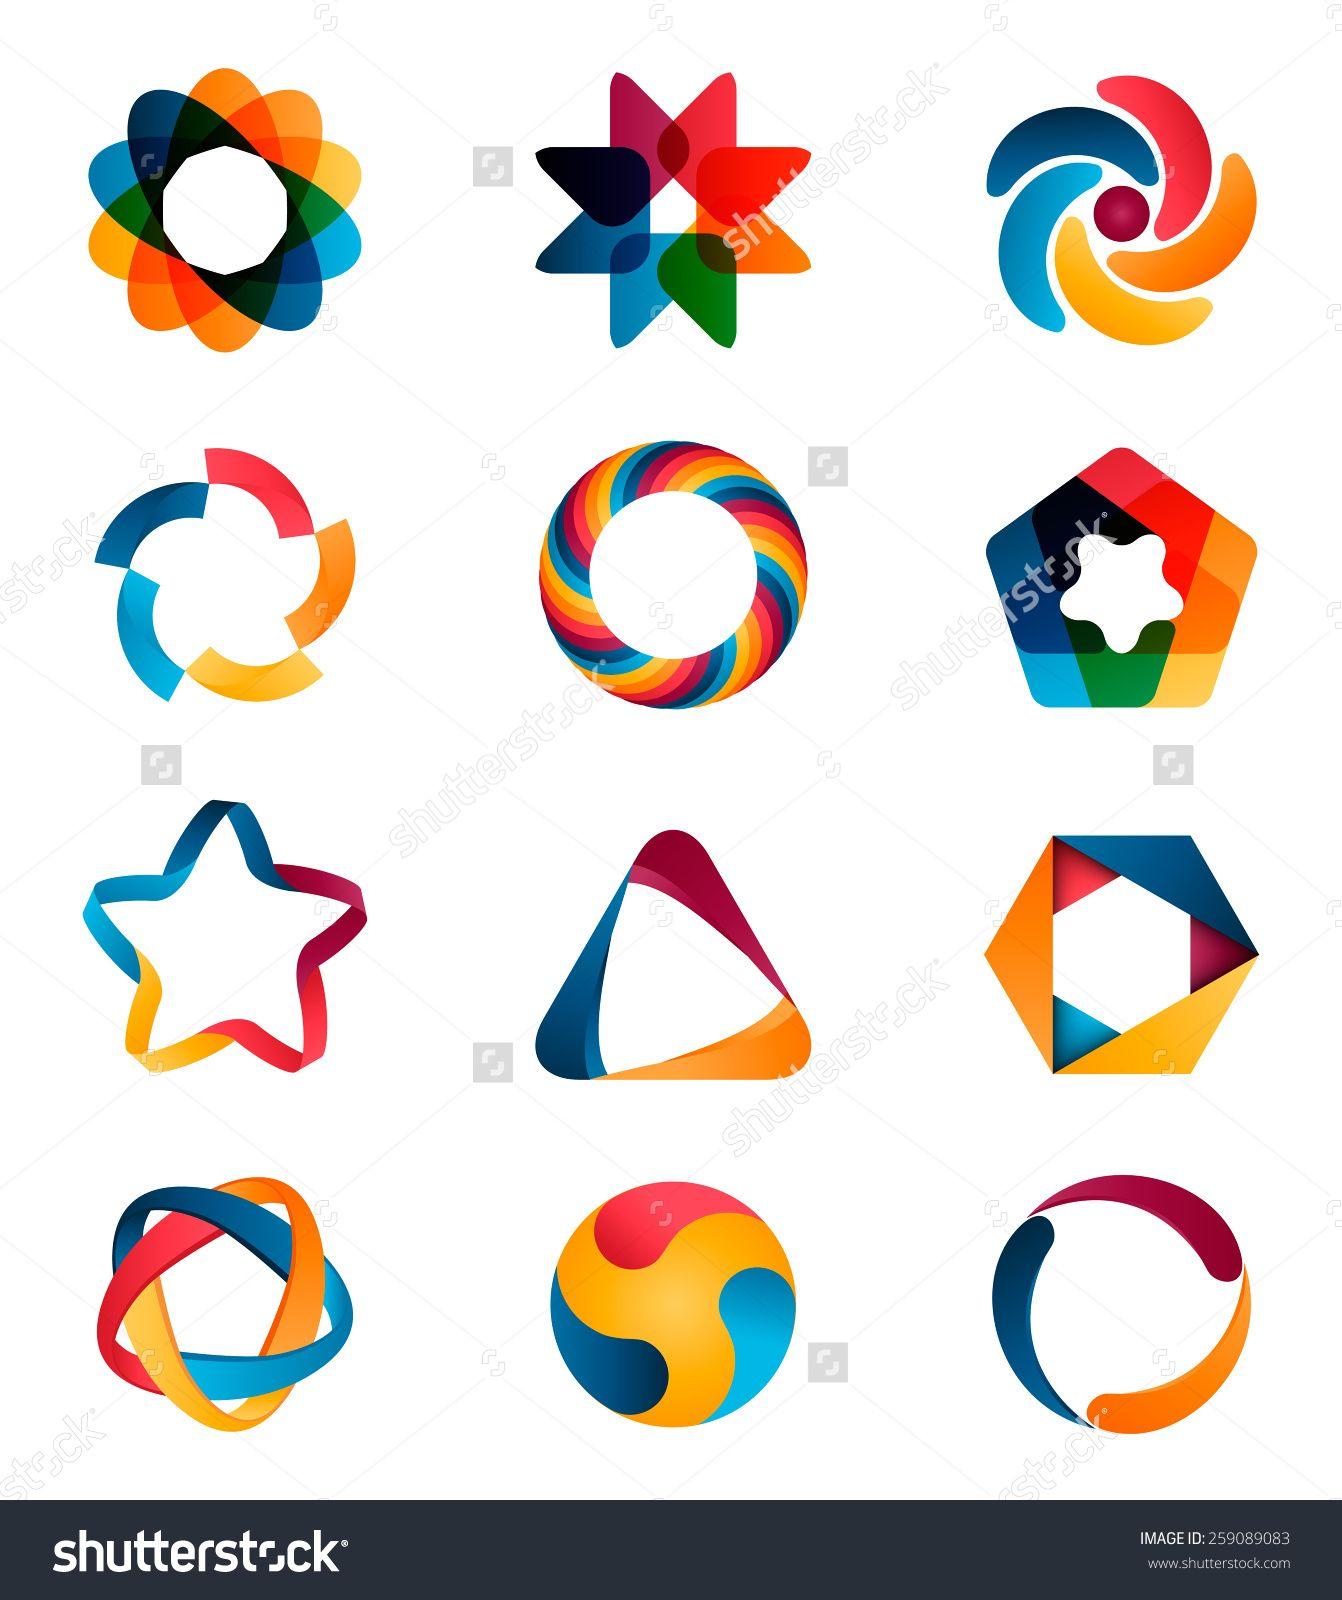 Interlocking Circles Logo - The best free Pentagon clipart image. Download from 11 free